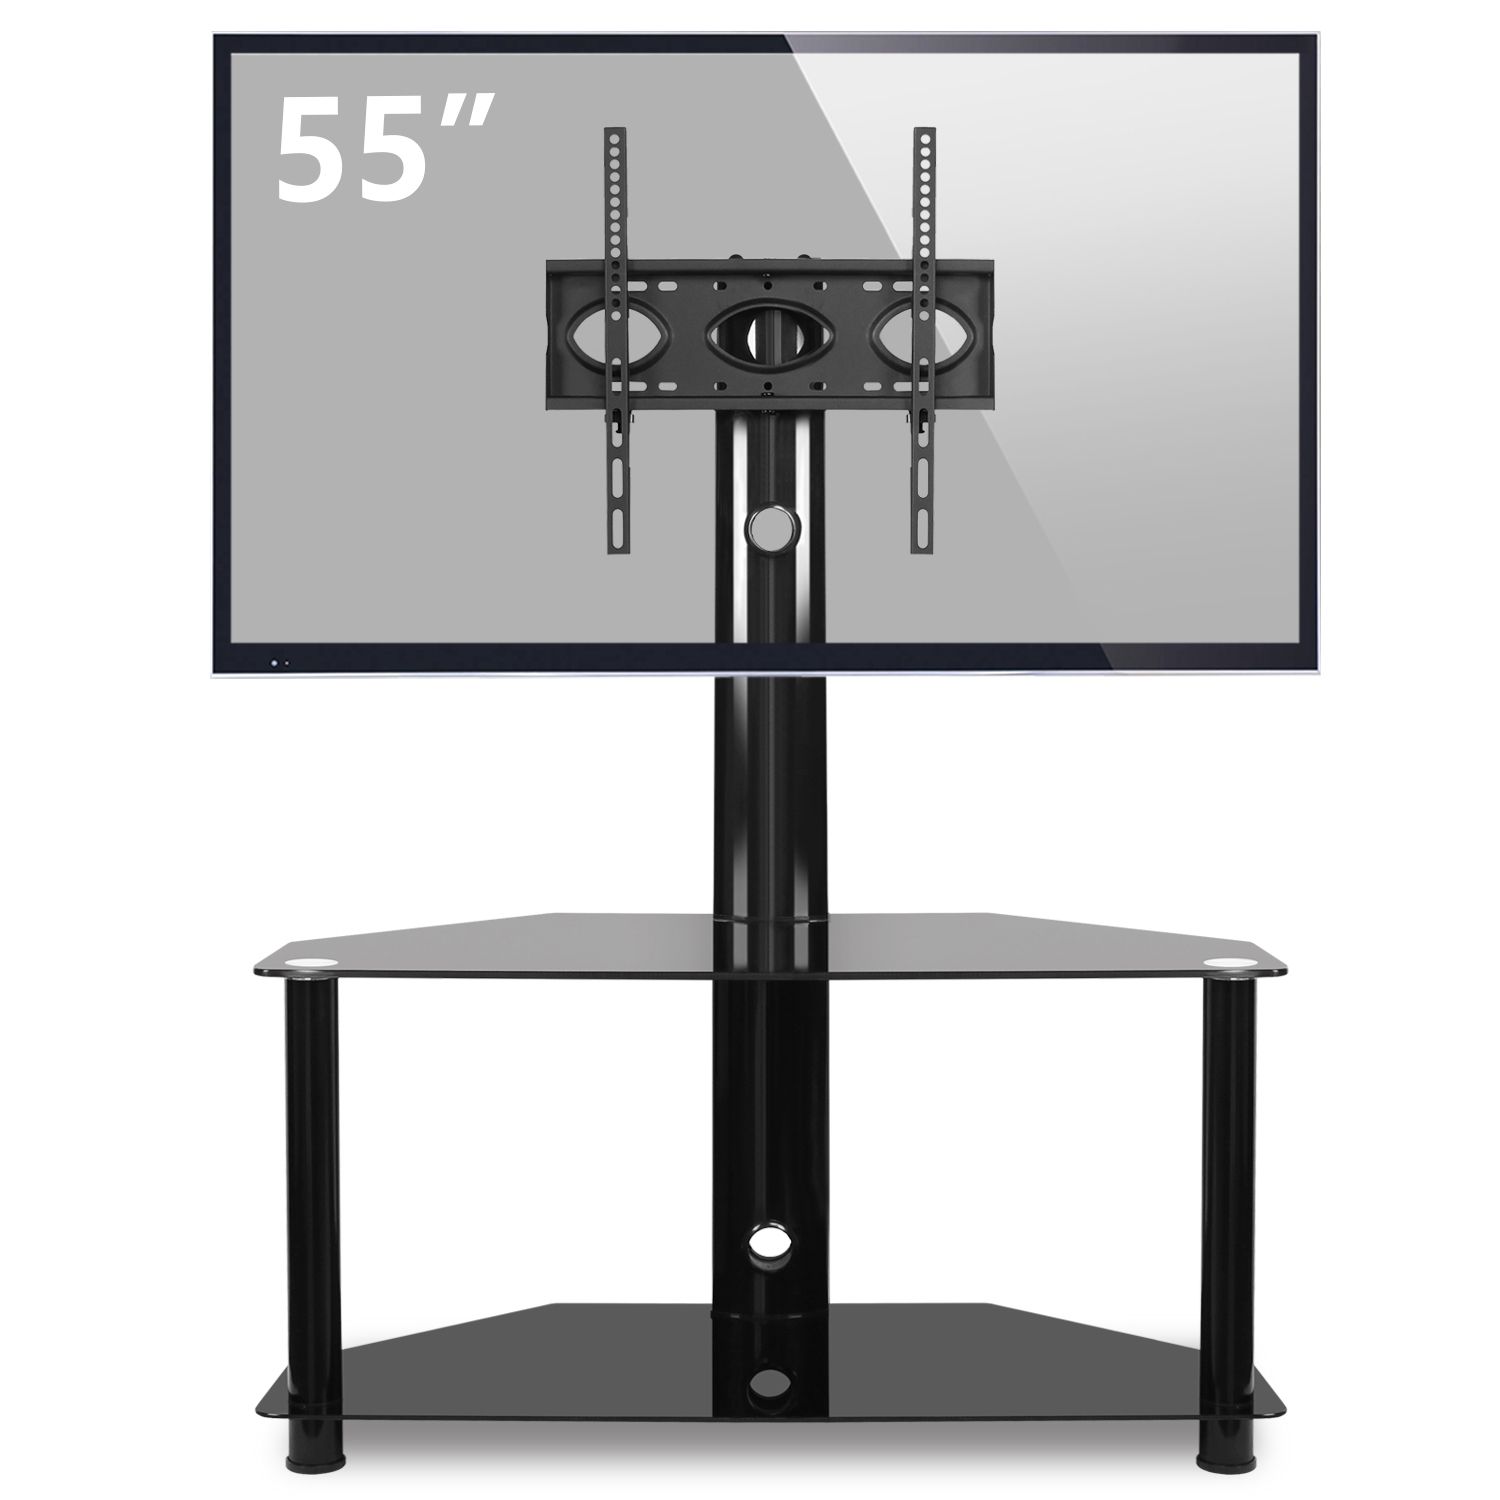 Rfiver Floor Corner Tv Stand With Swivel Mount Height Inside Swivel Tv Stands With Mount (View 4 of 15)